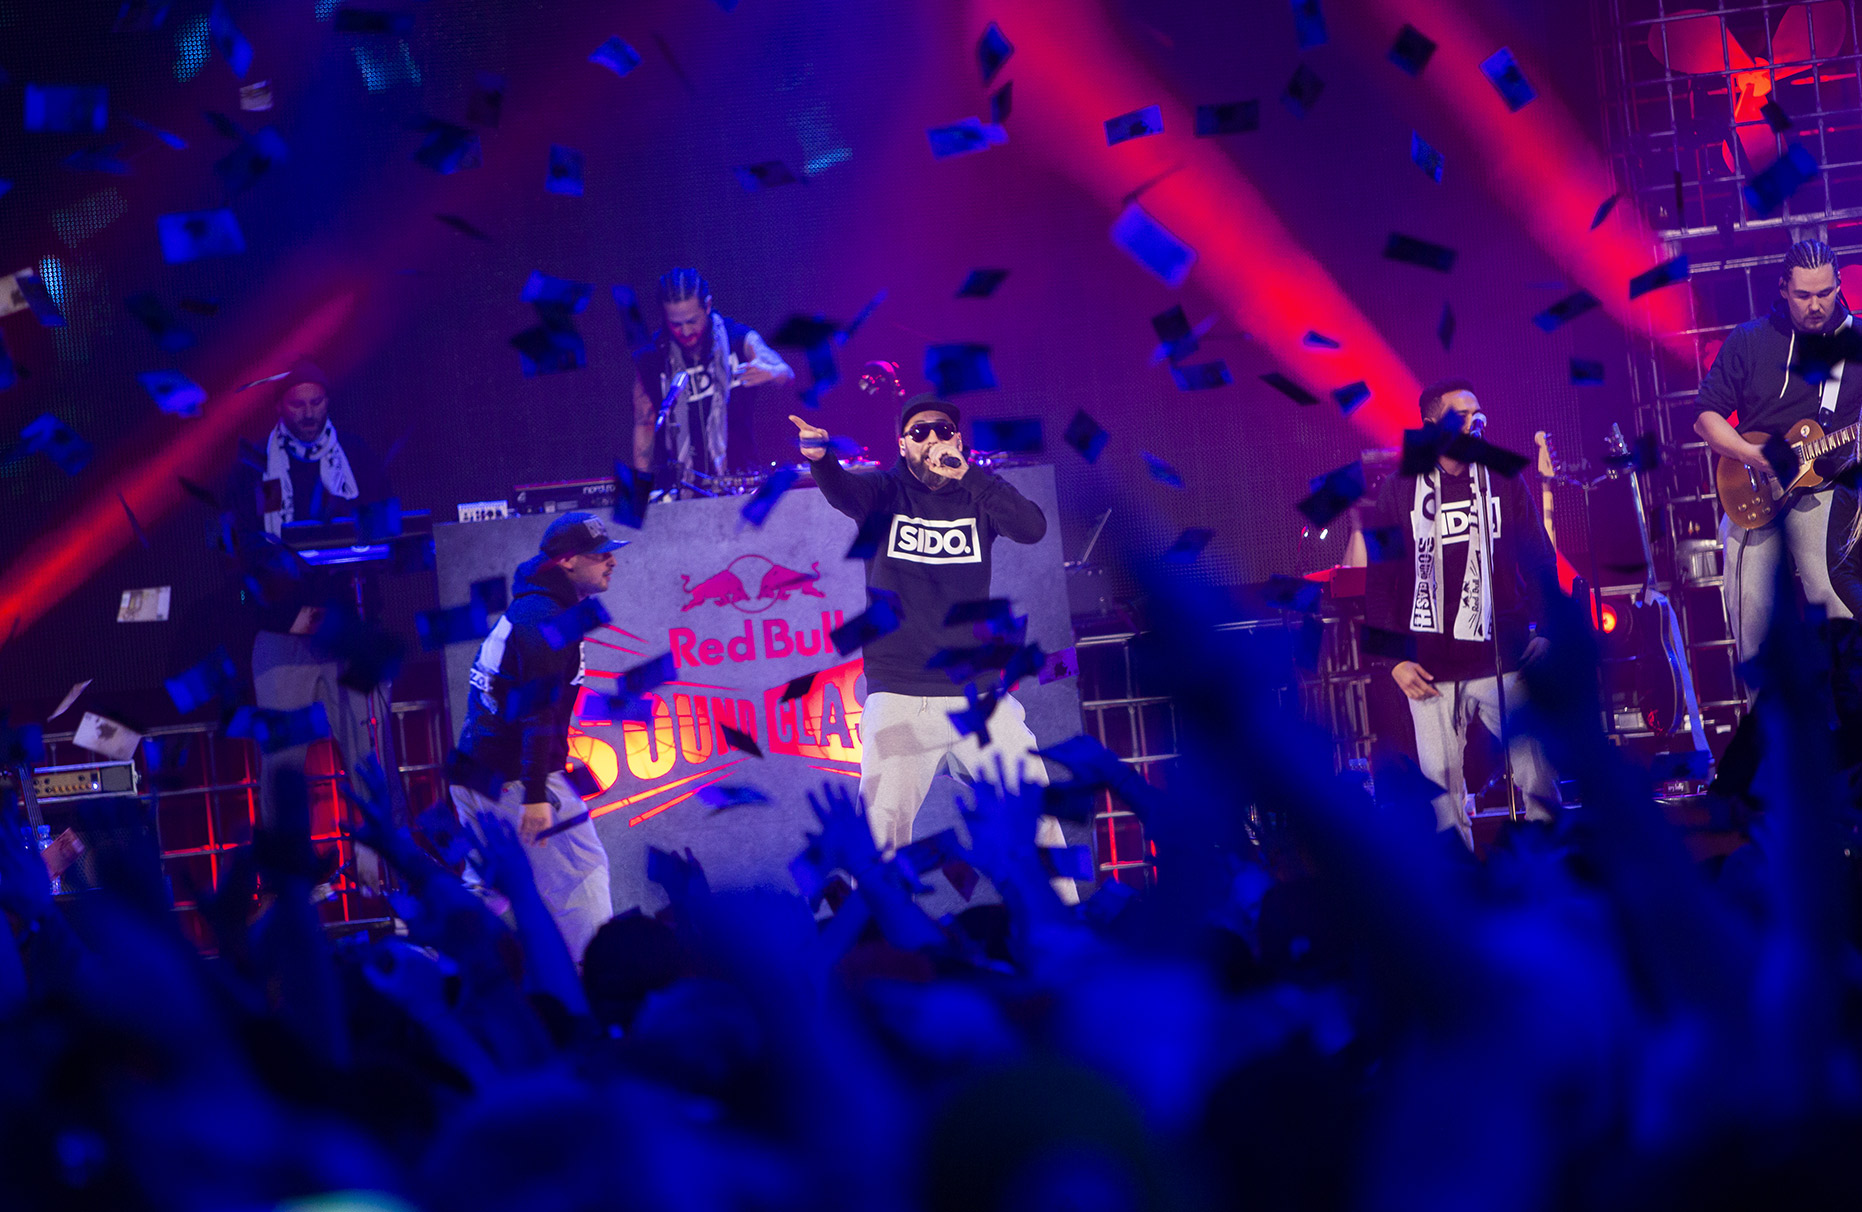 © Dirk Mathesius, SIDO is performing at Red Bull Sound Clash Stage, Essen, germany, Client Red Bull